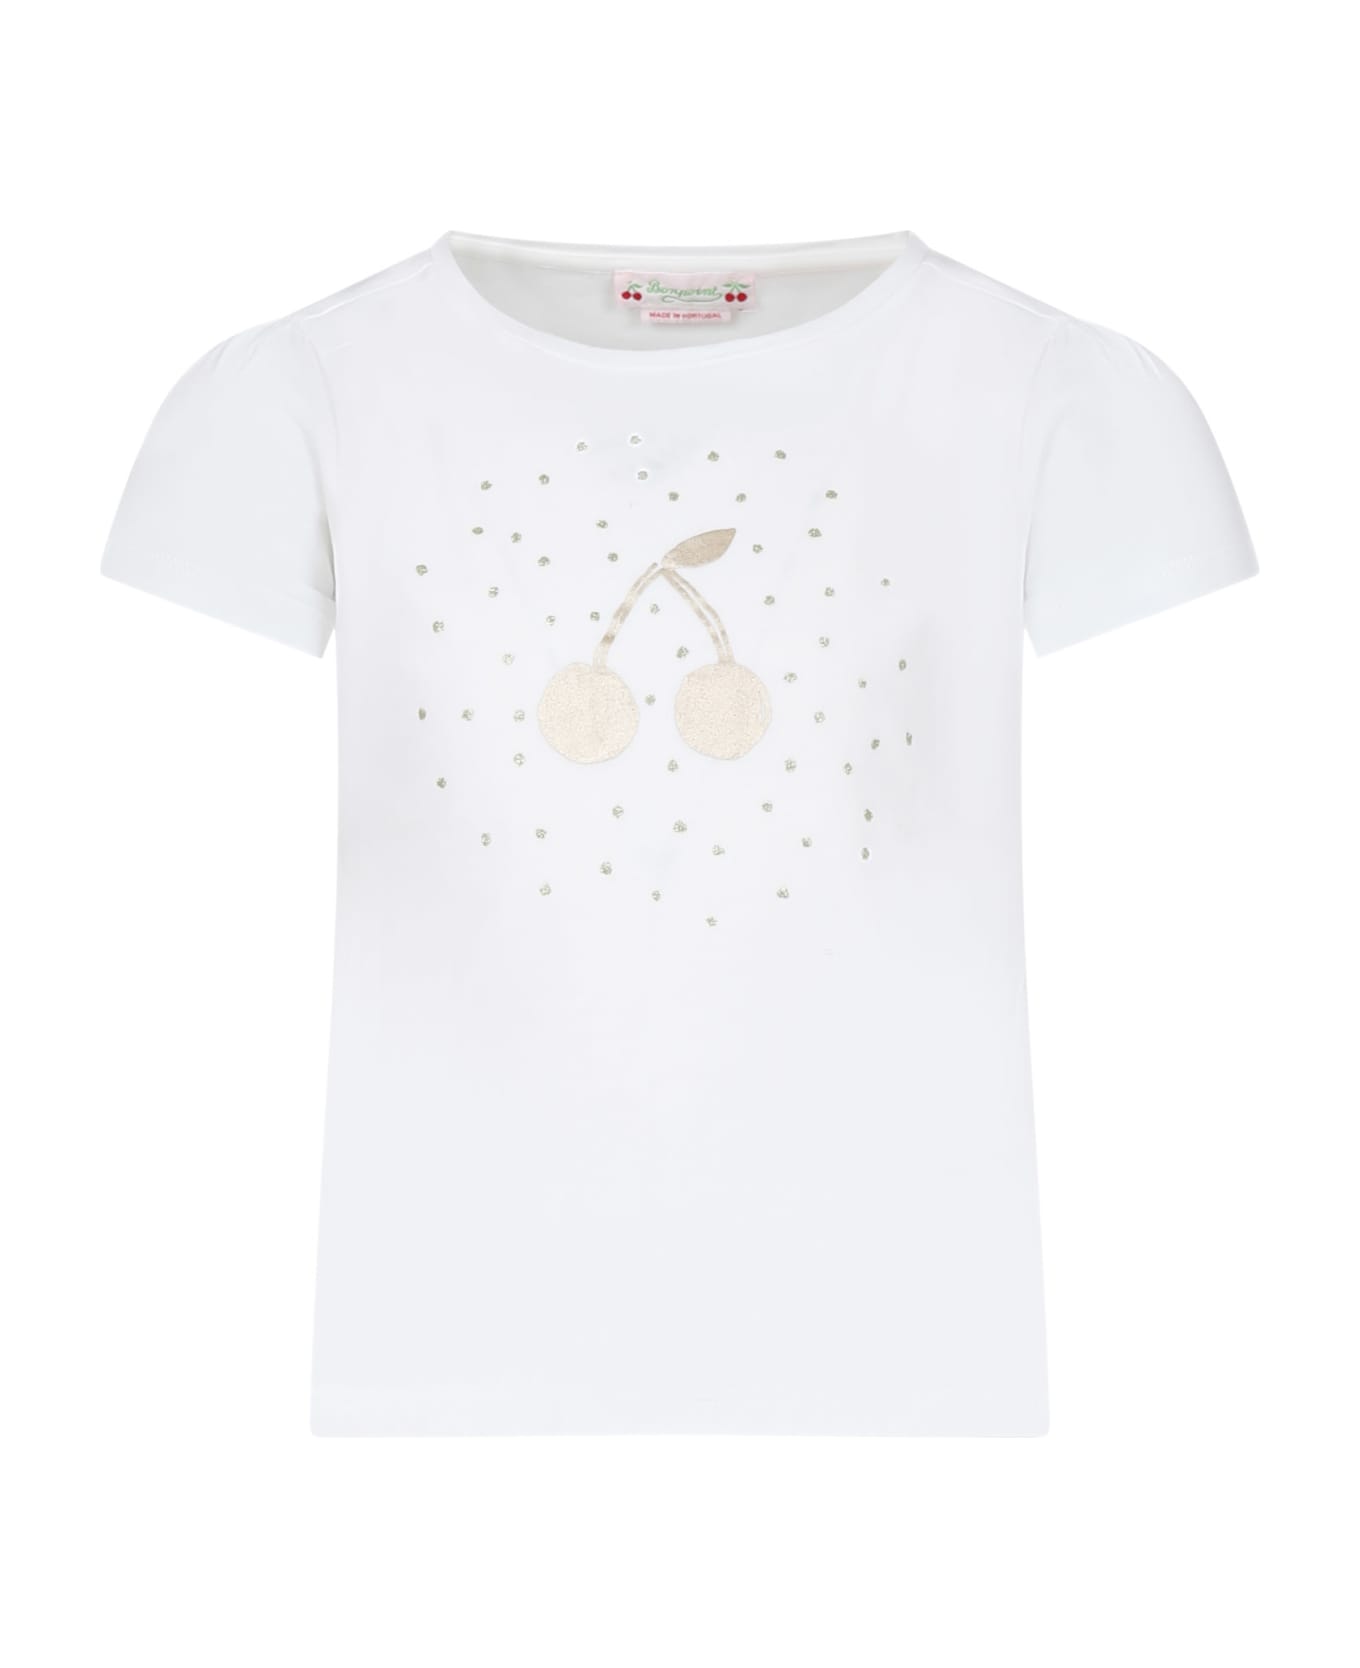 Bonpoint White T-shirt For Girl With Iconic Cherry - White